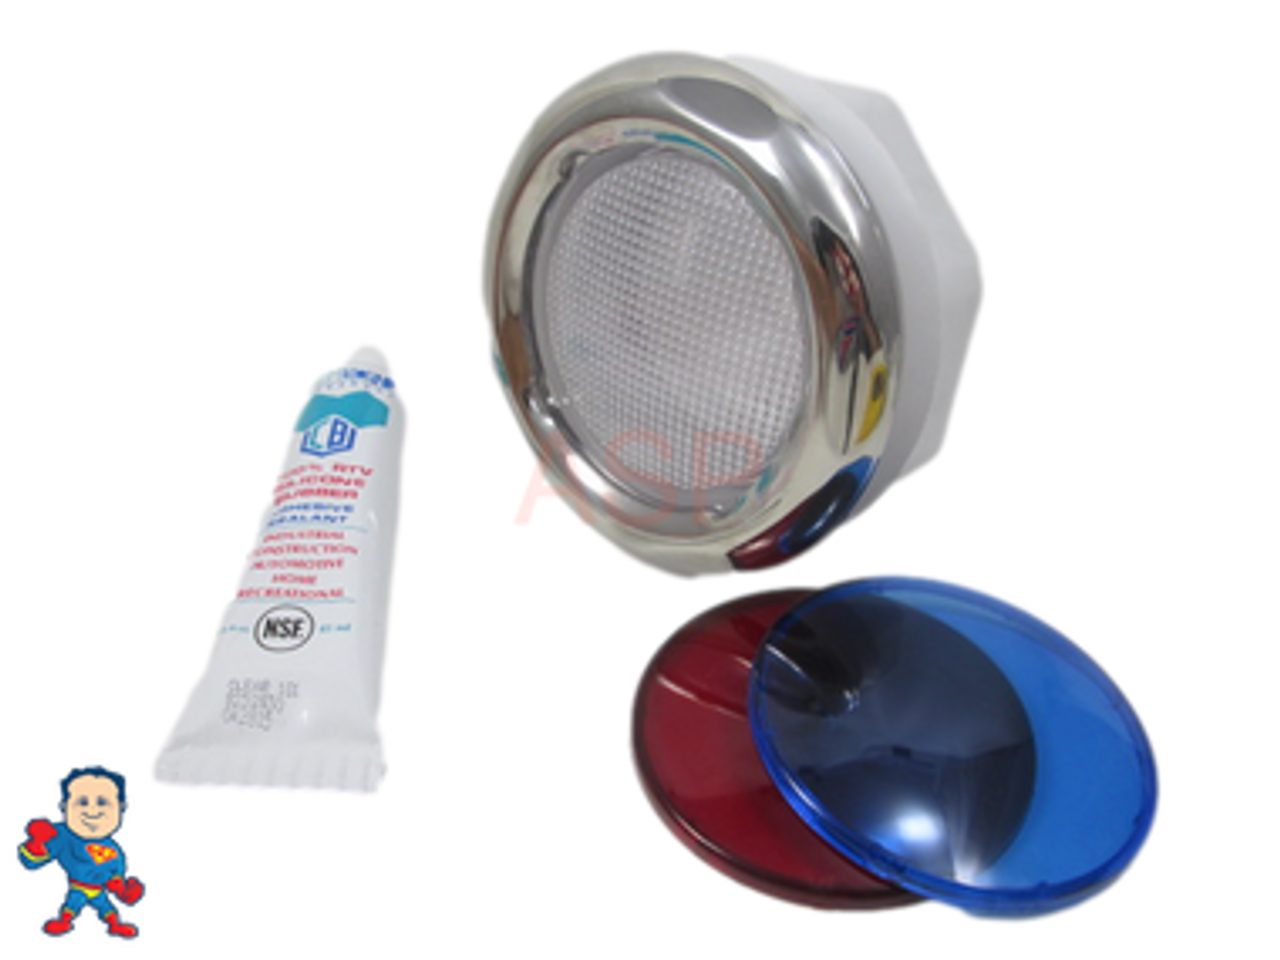 Spa Hot Tub Chrome Light Lens Red & Blue Covers Kit Silicon 5" Face How To Video